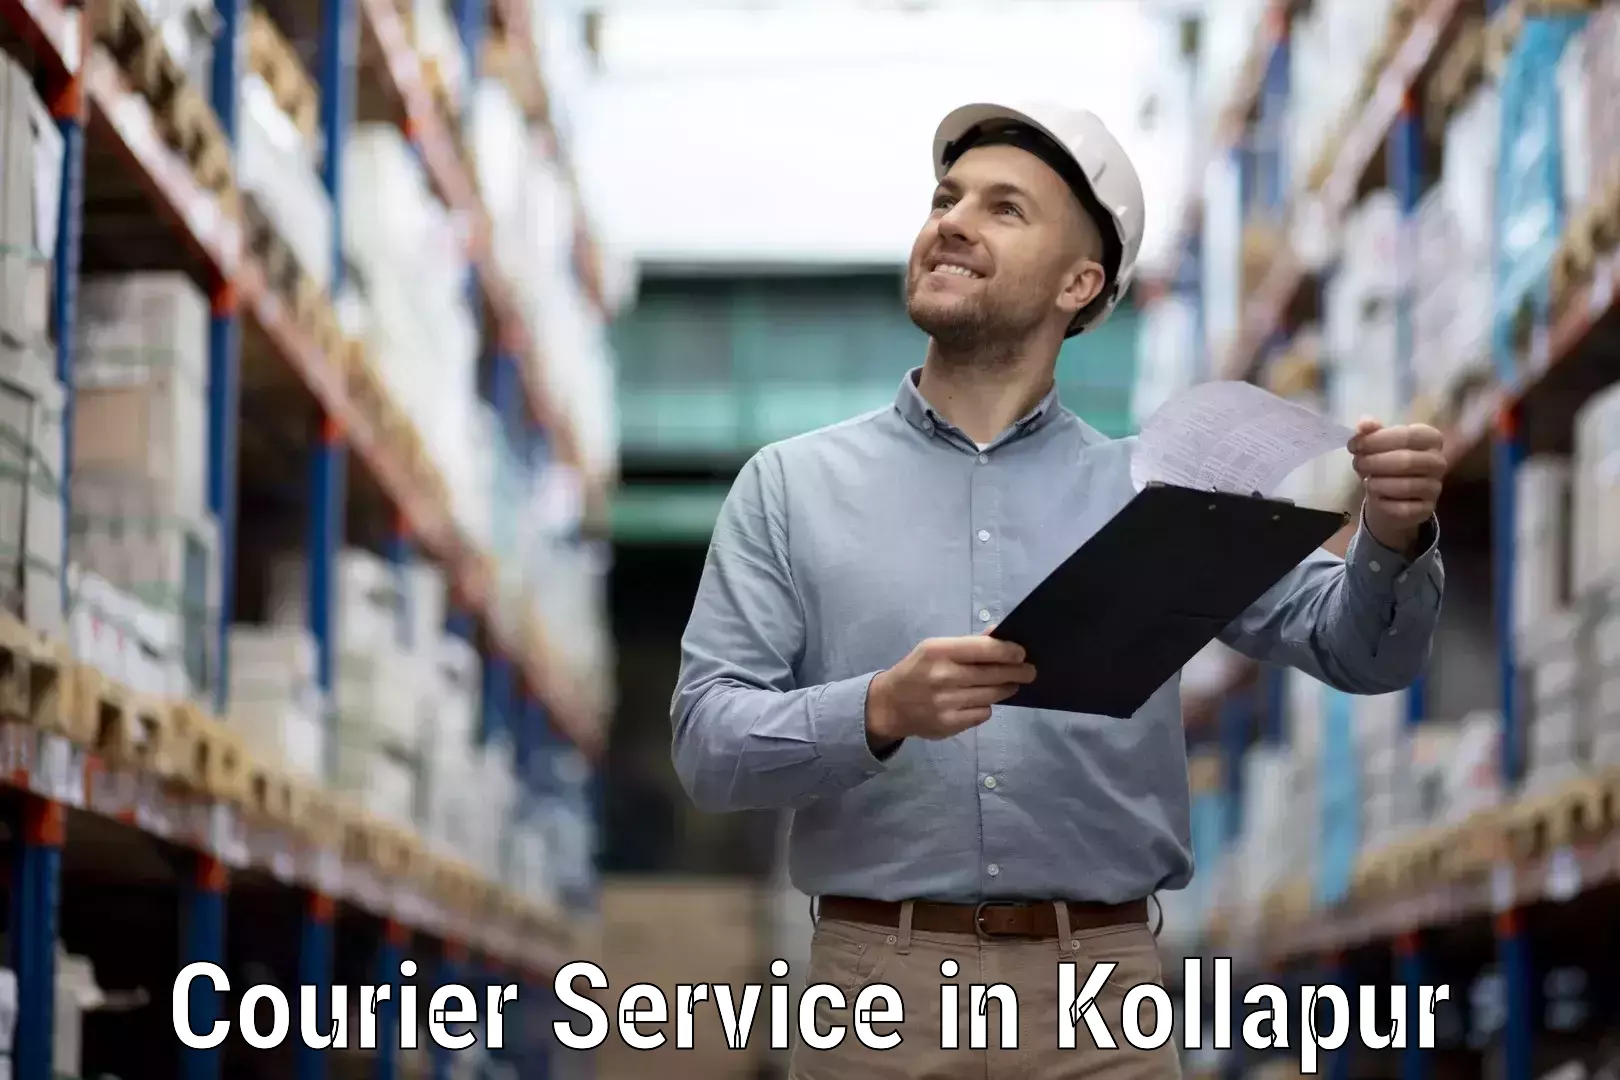 Express delivery solutions in Kollapur